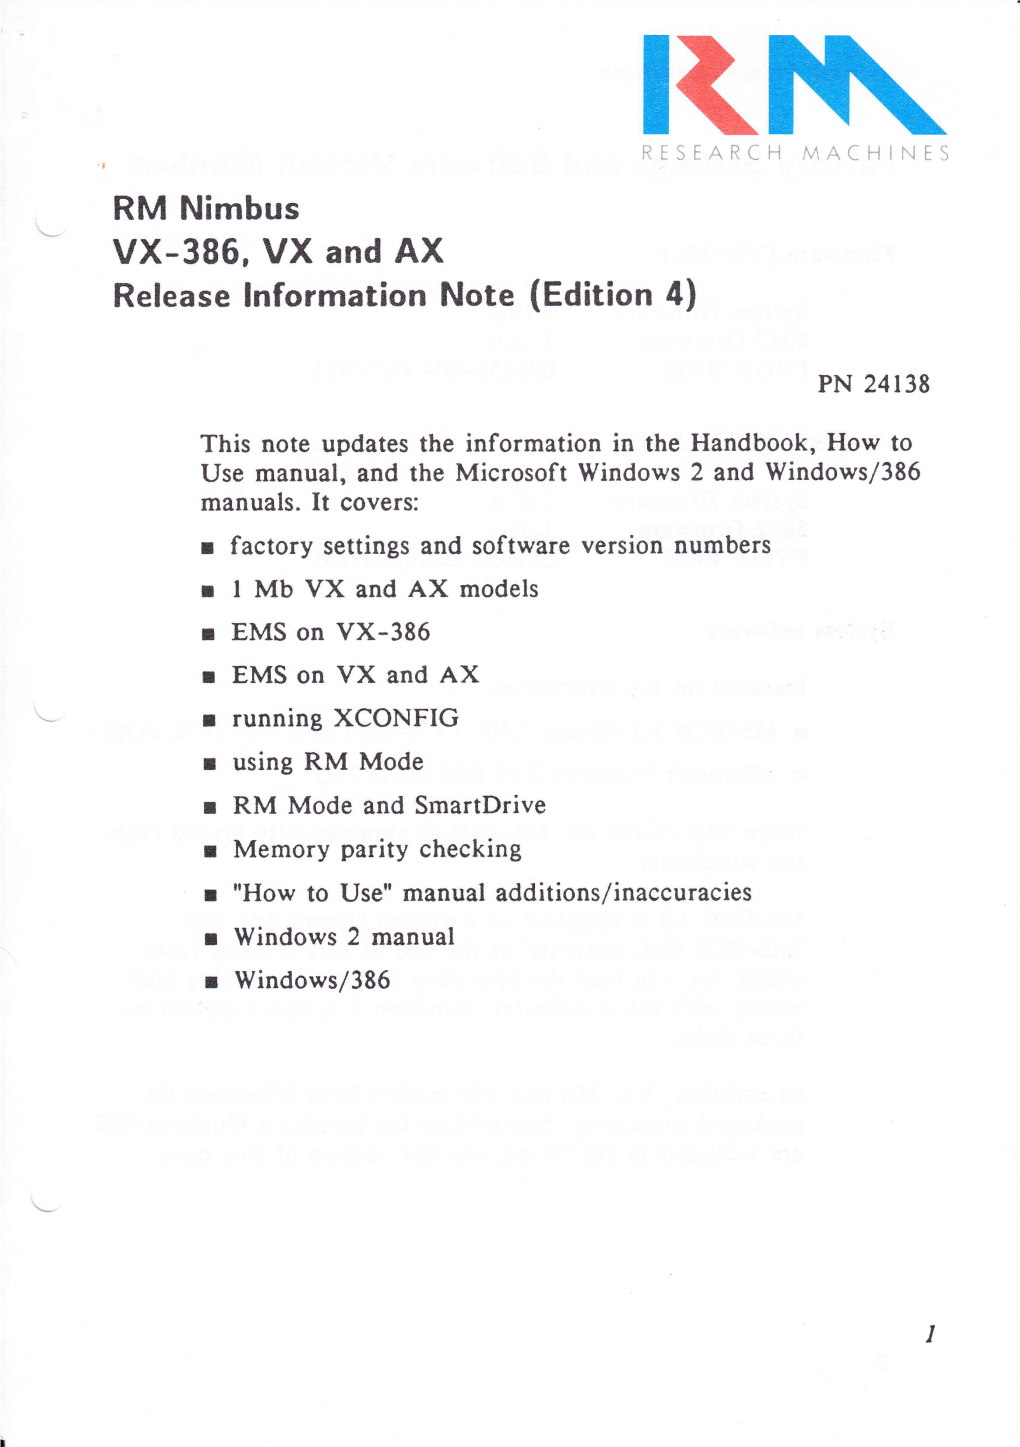 RM Nimbus VX-386, VX and AX Release Lnformation Note (Edition 4)